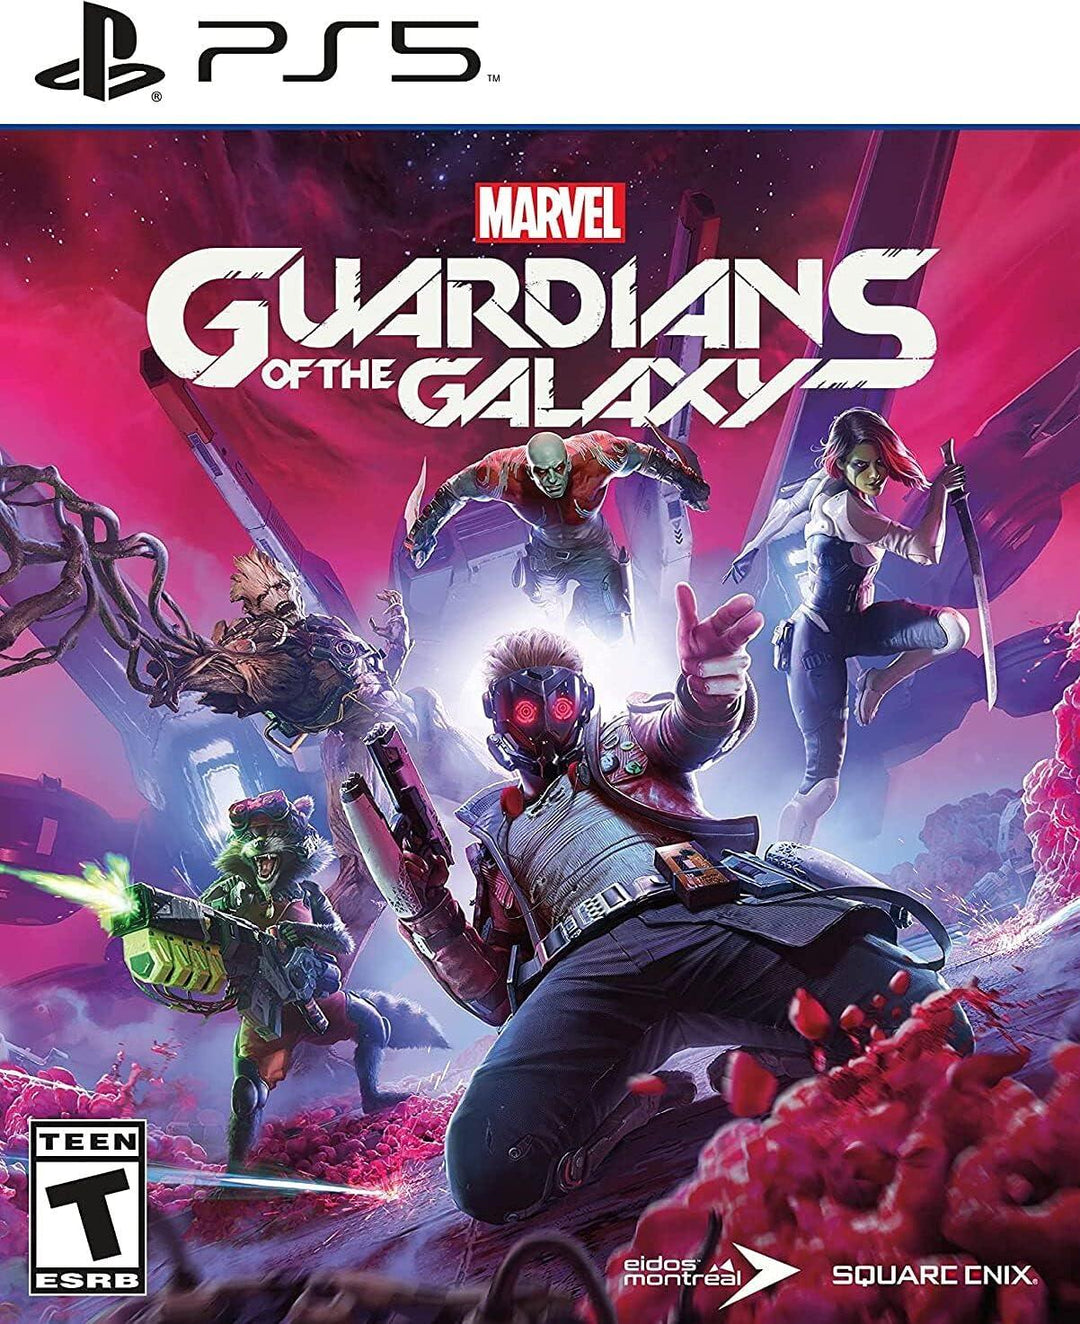 Marvels Guardians of the Galaxy / PS5 / Playstation 5 - GD Games 